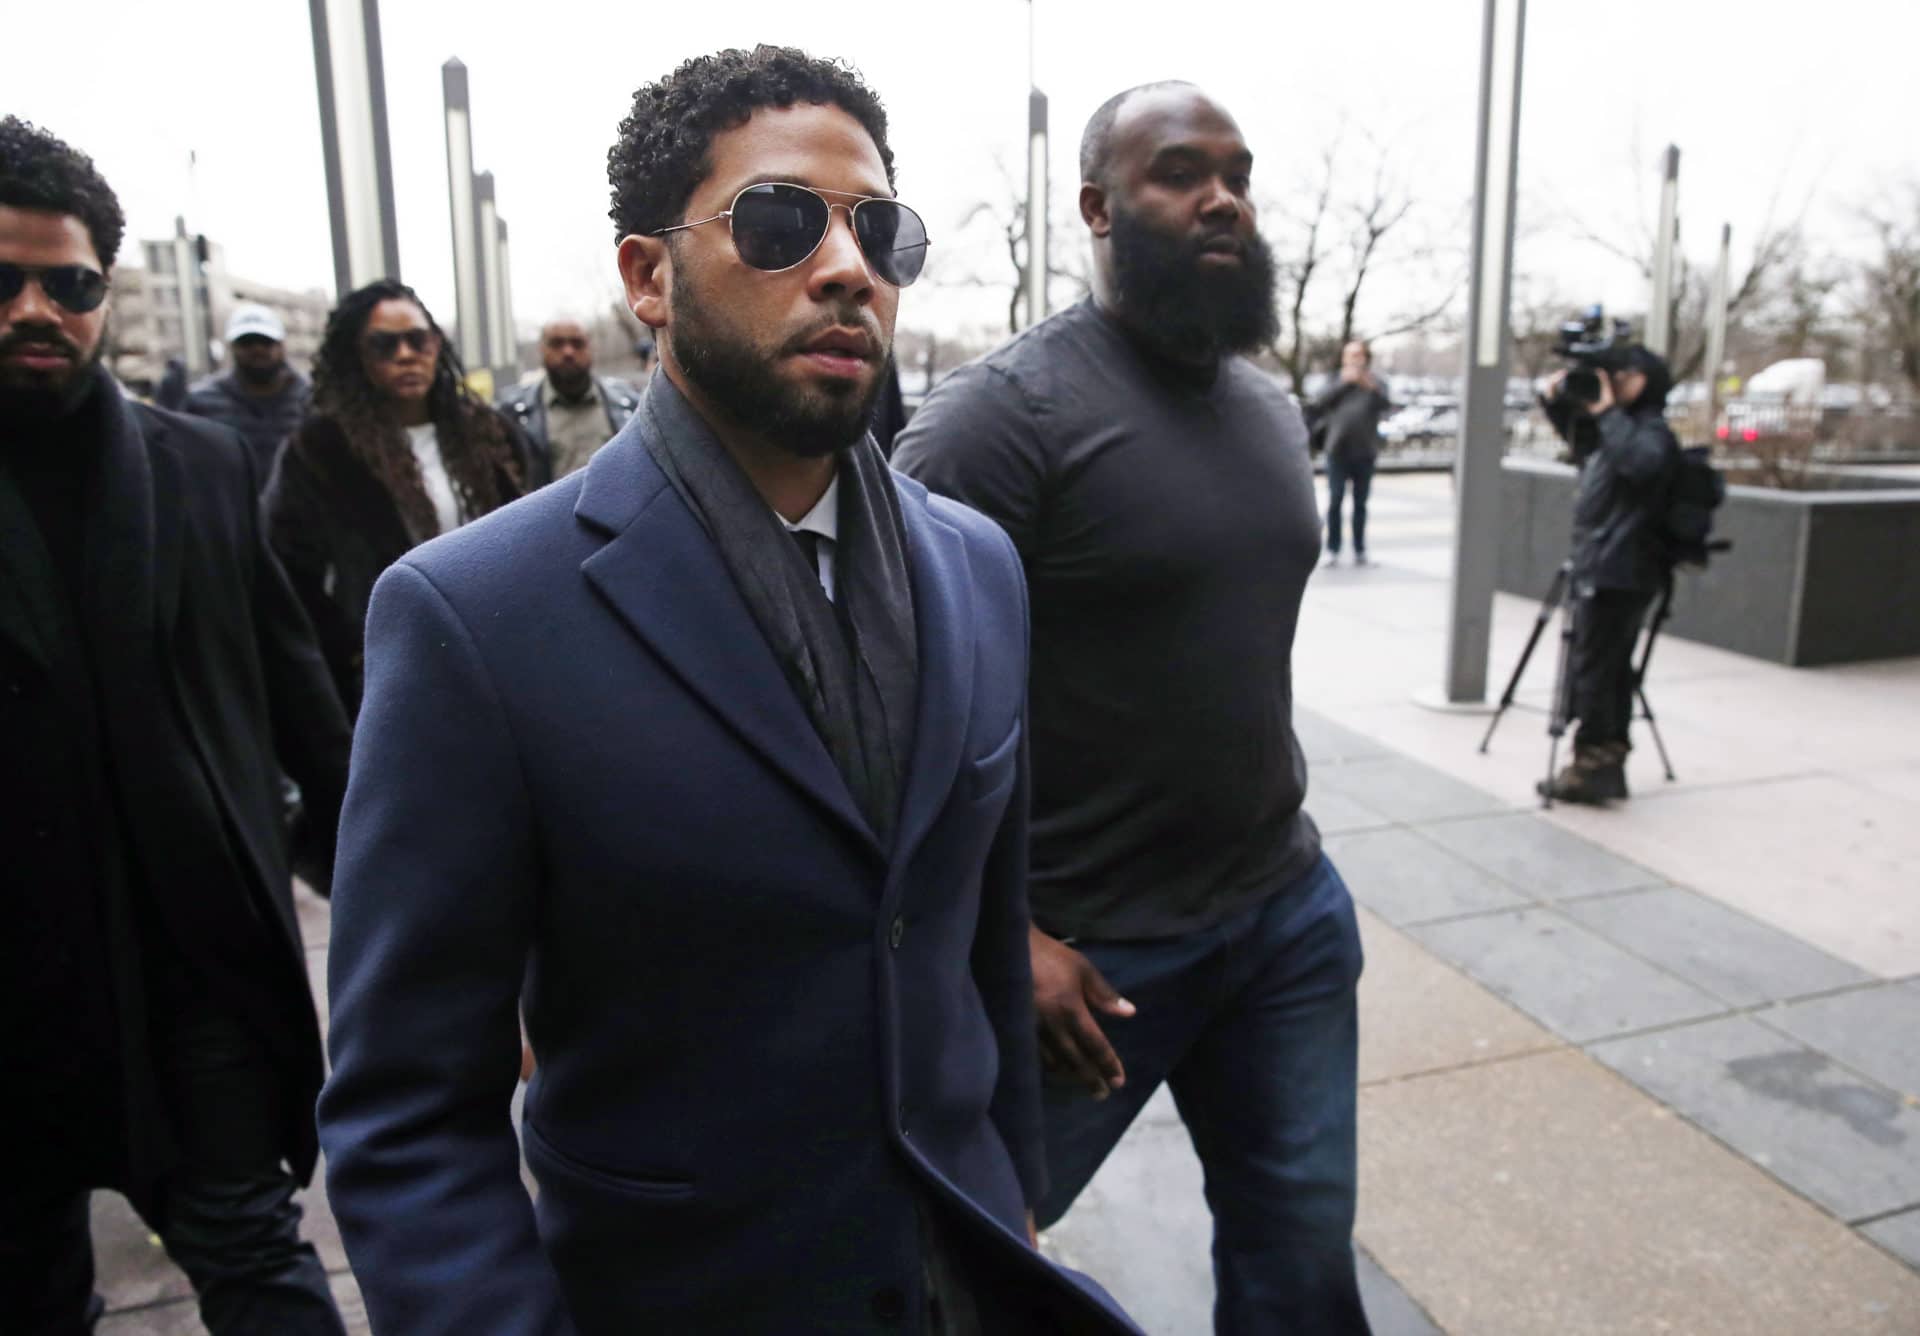 Brothers Sue Jussie Smollett’s Legal Team For Defamation